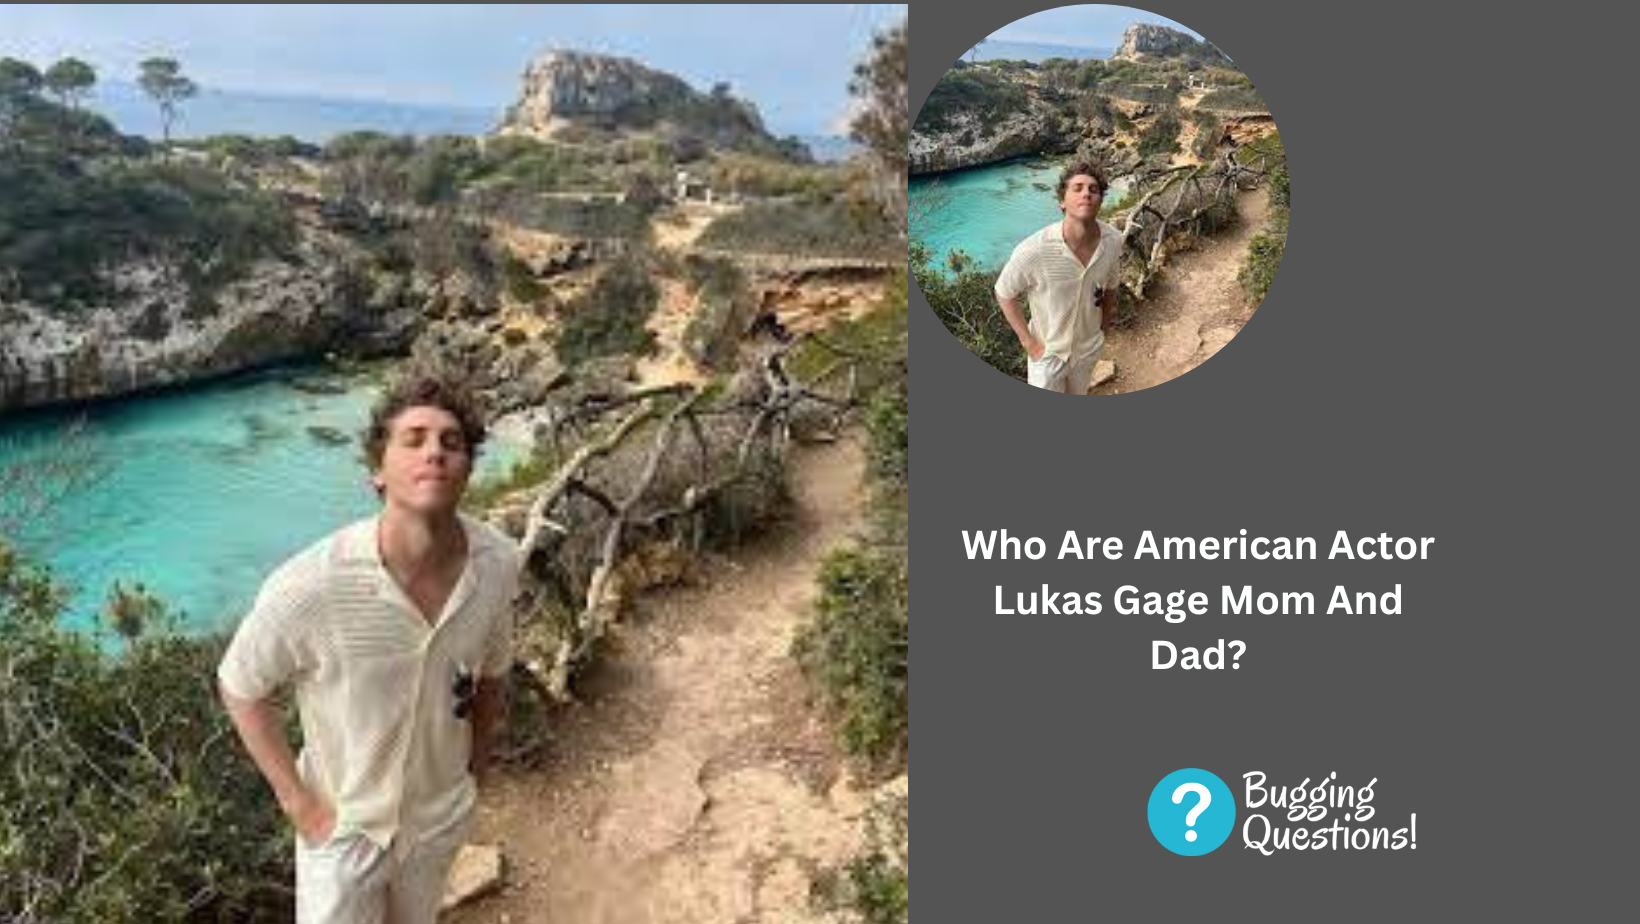 Who Are American Actor Lukas Gage Mom And Dad?